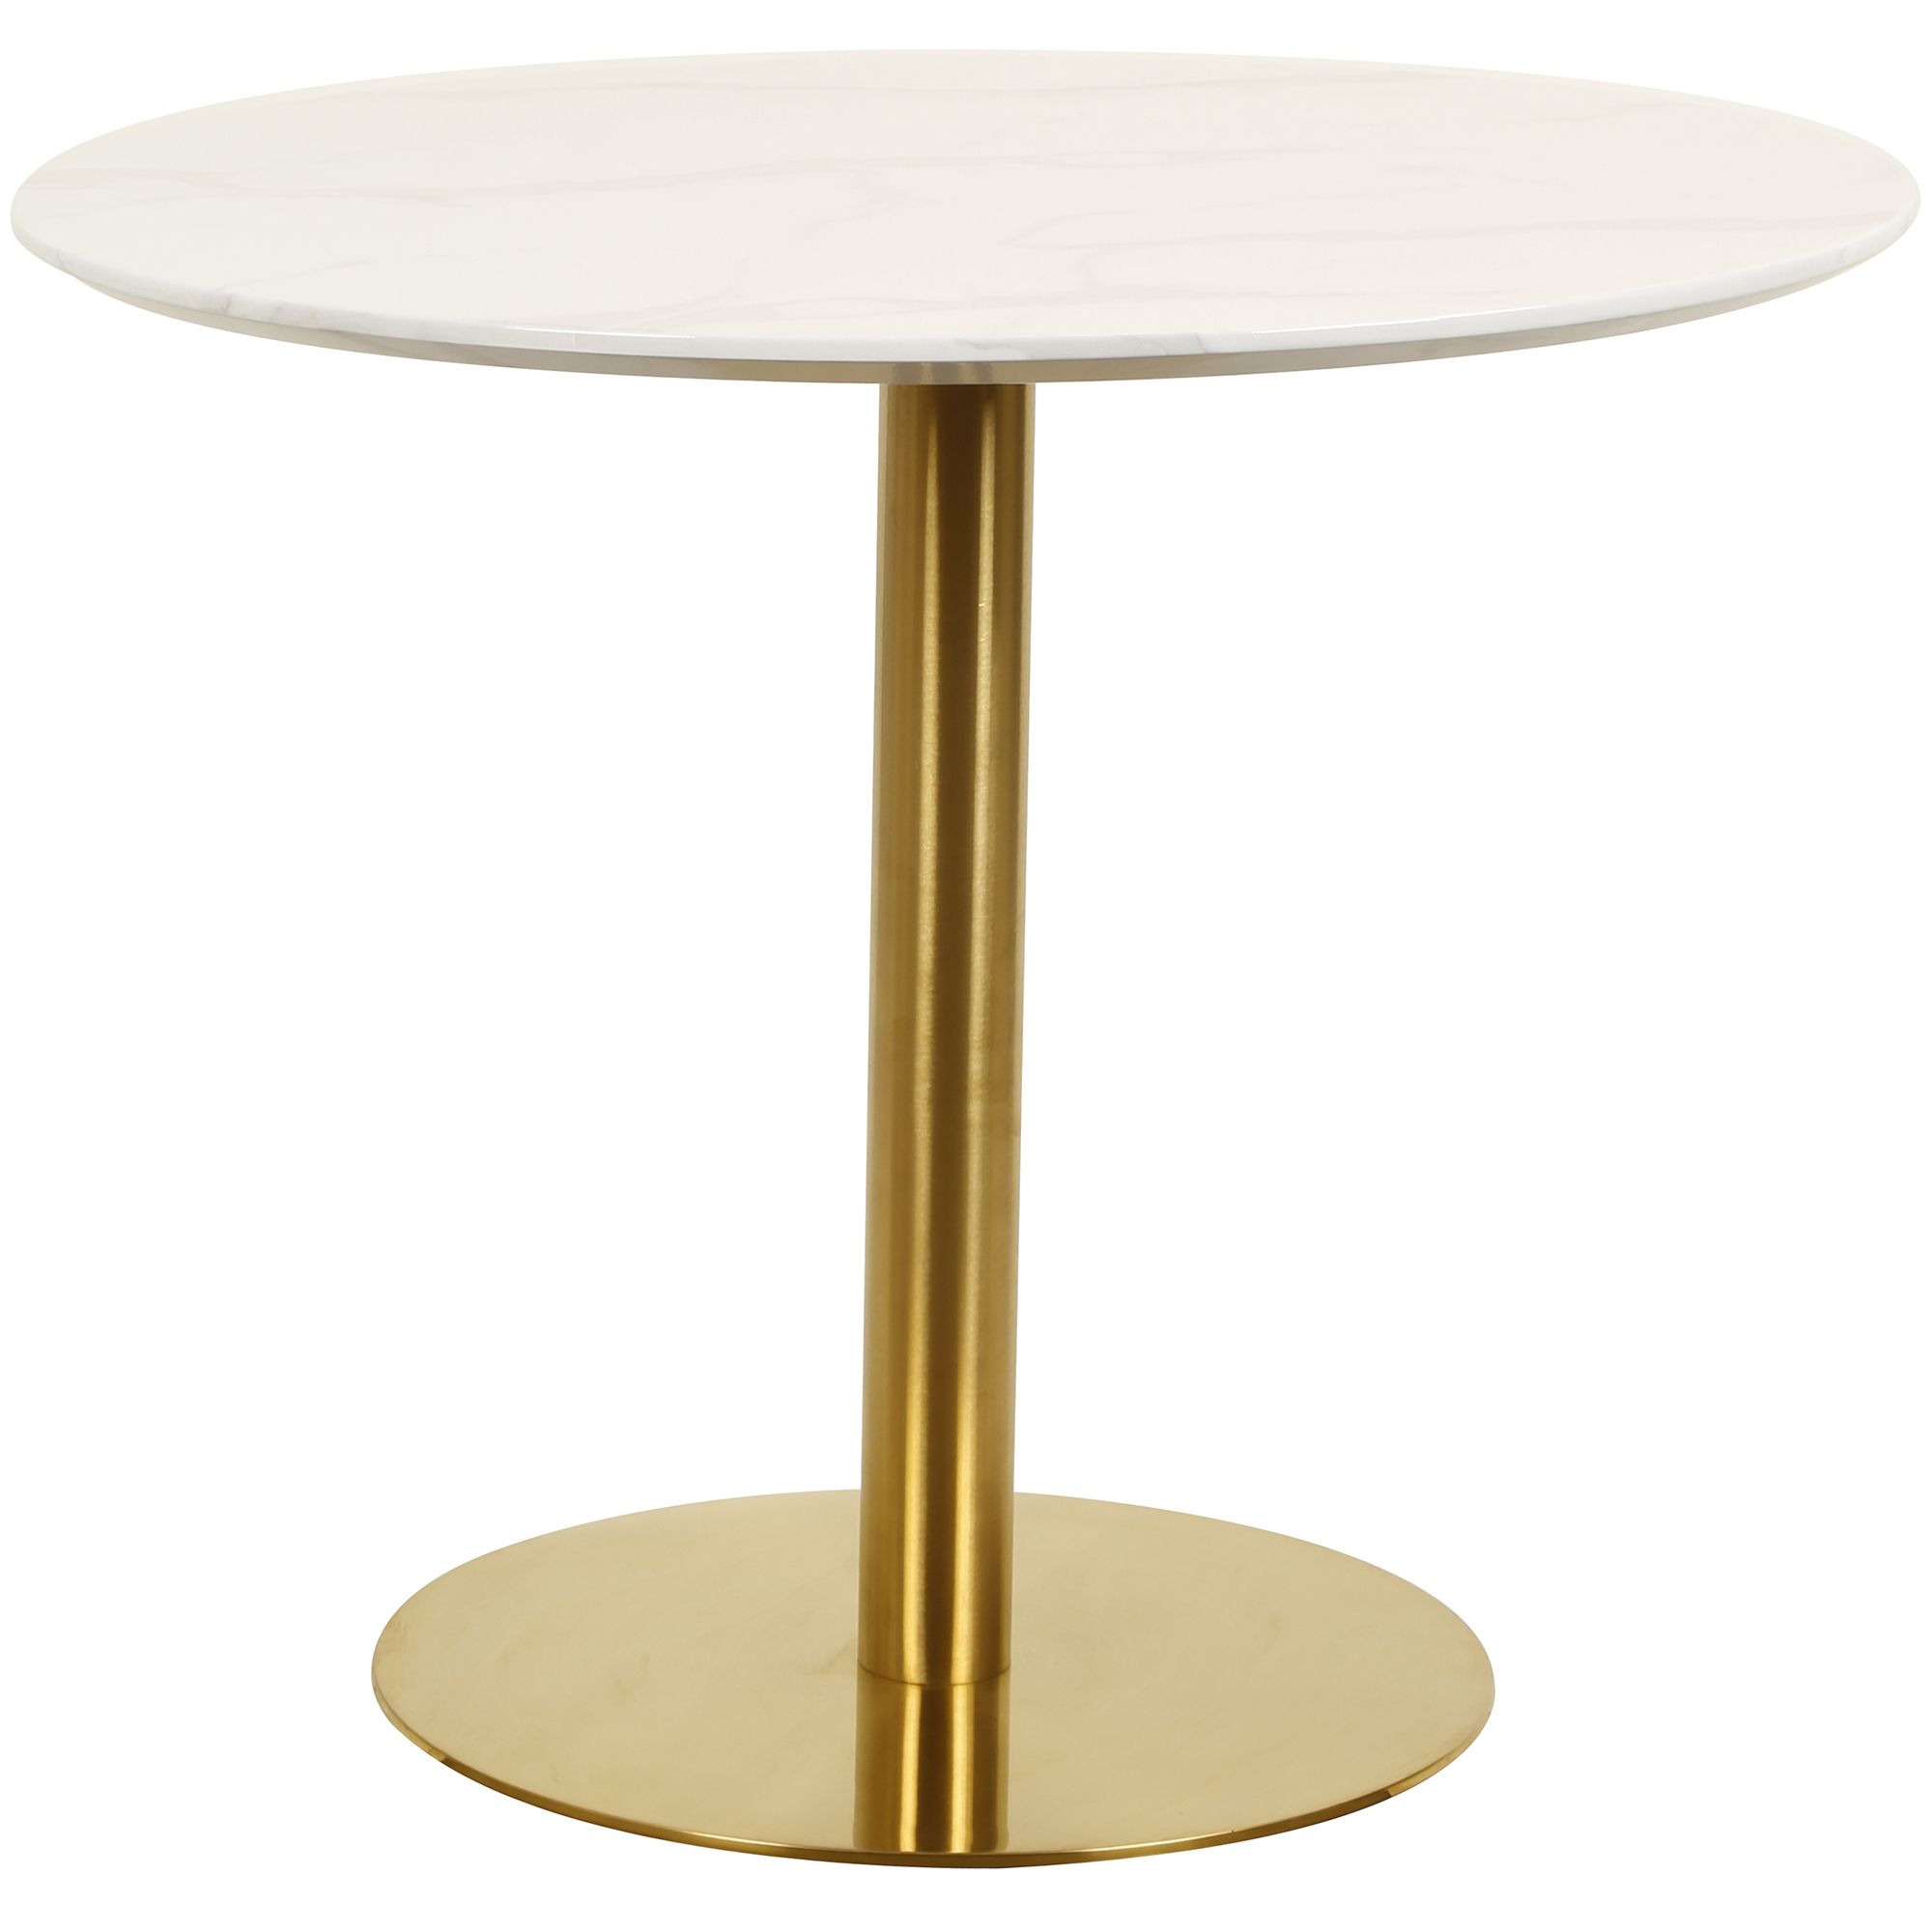 New White & Gold Hartley Round Dining Table – Keys Road For Well Known Gold Dining Tables (View 18 of 20)